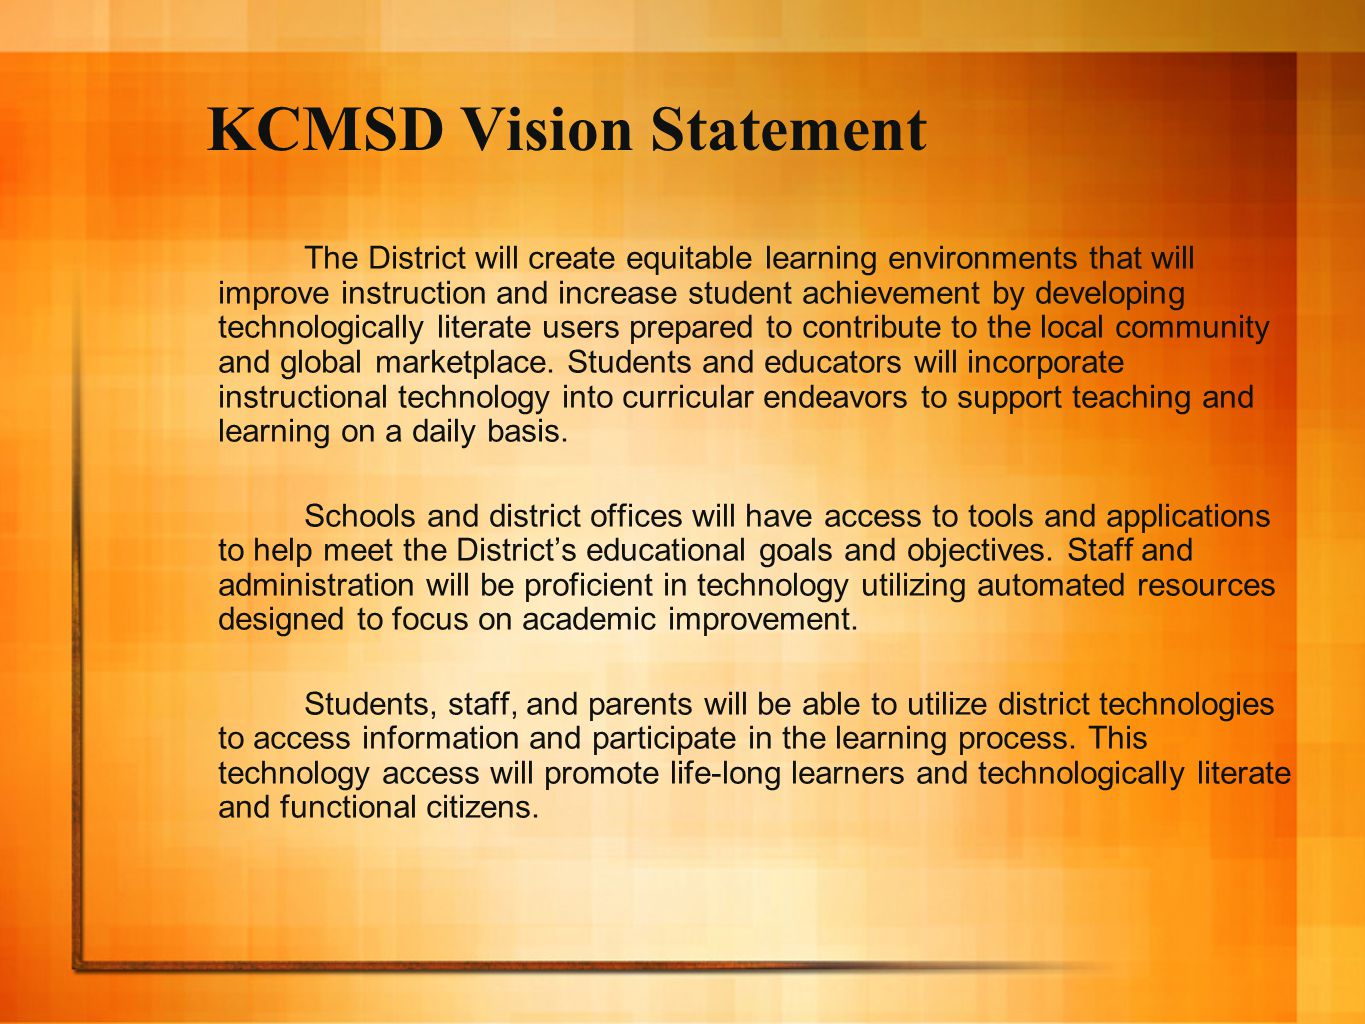 KCMSD Vision Statement The District will create equitable learning environments that will improve instruction and increase student achievement by developing technologically literate users prepared to contribute to the local community and global marketplace.